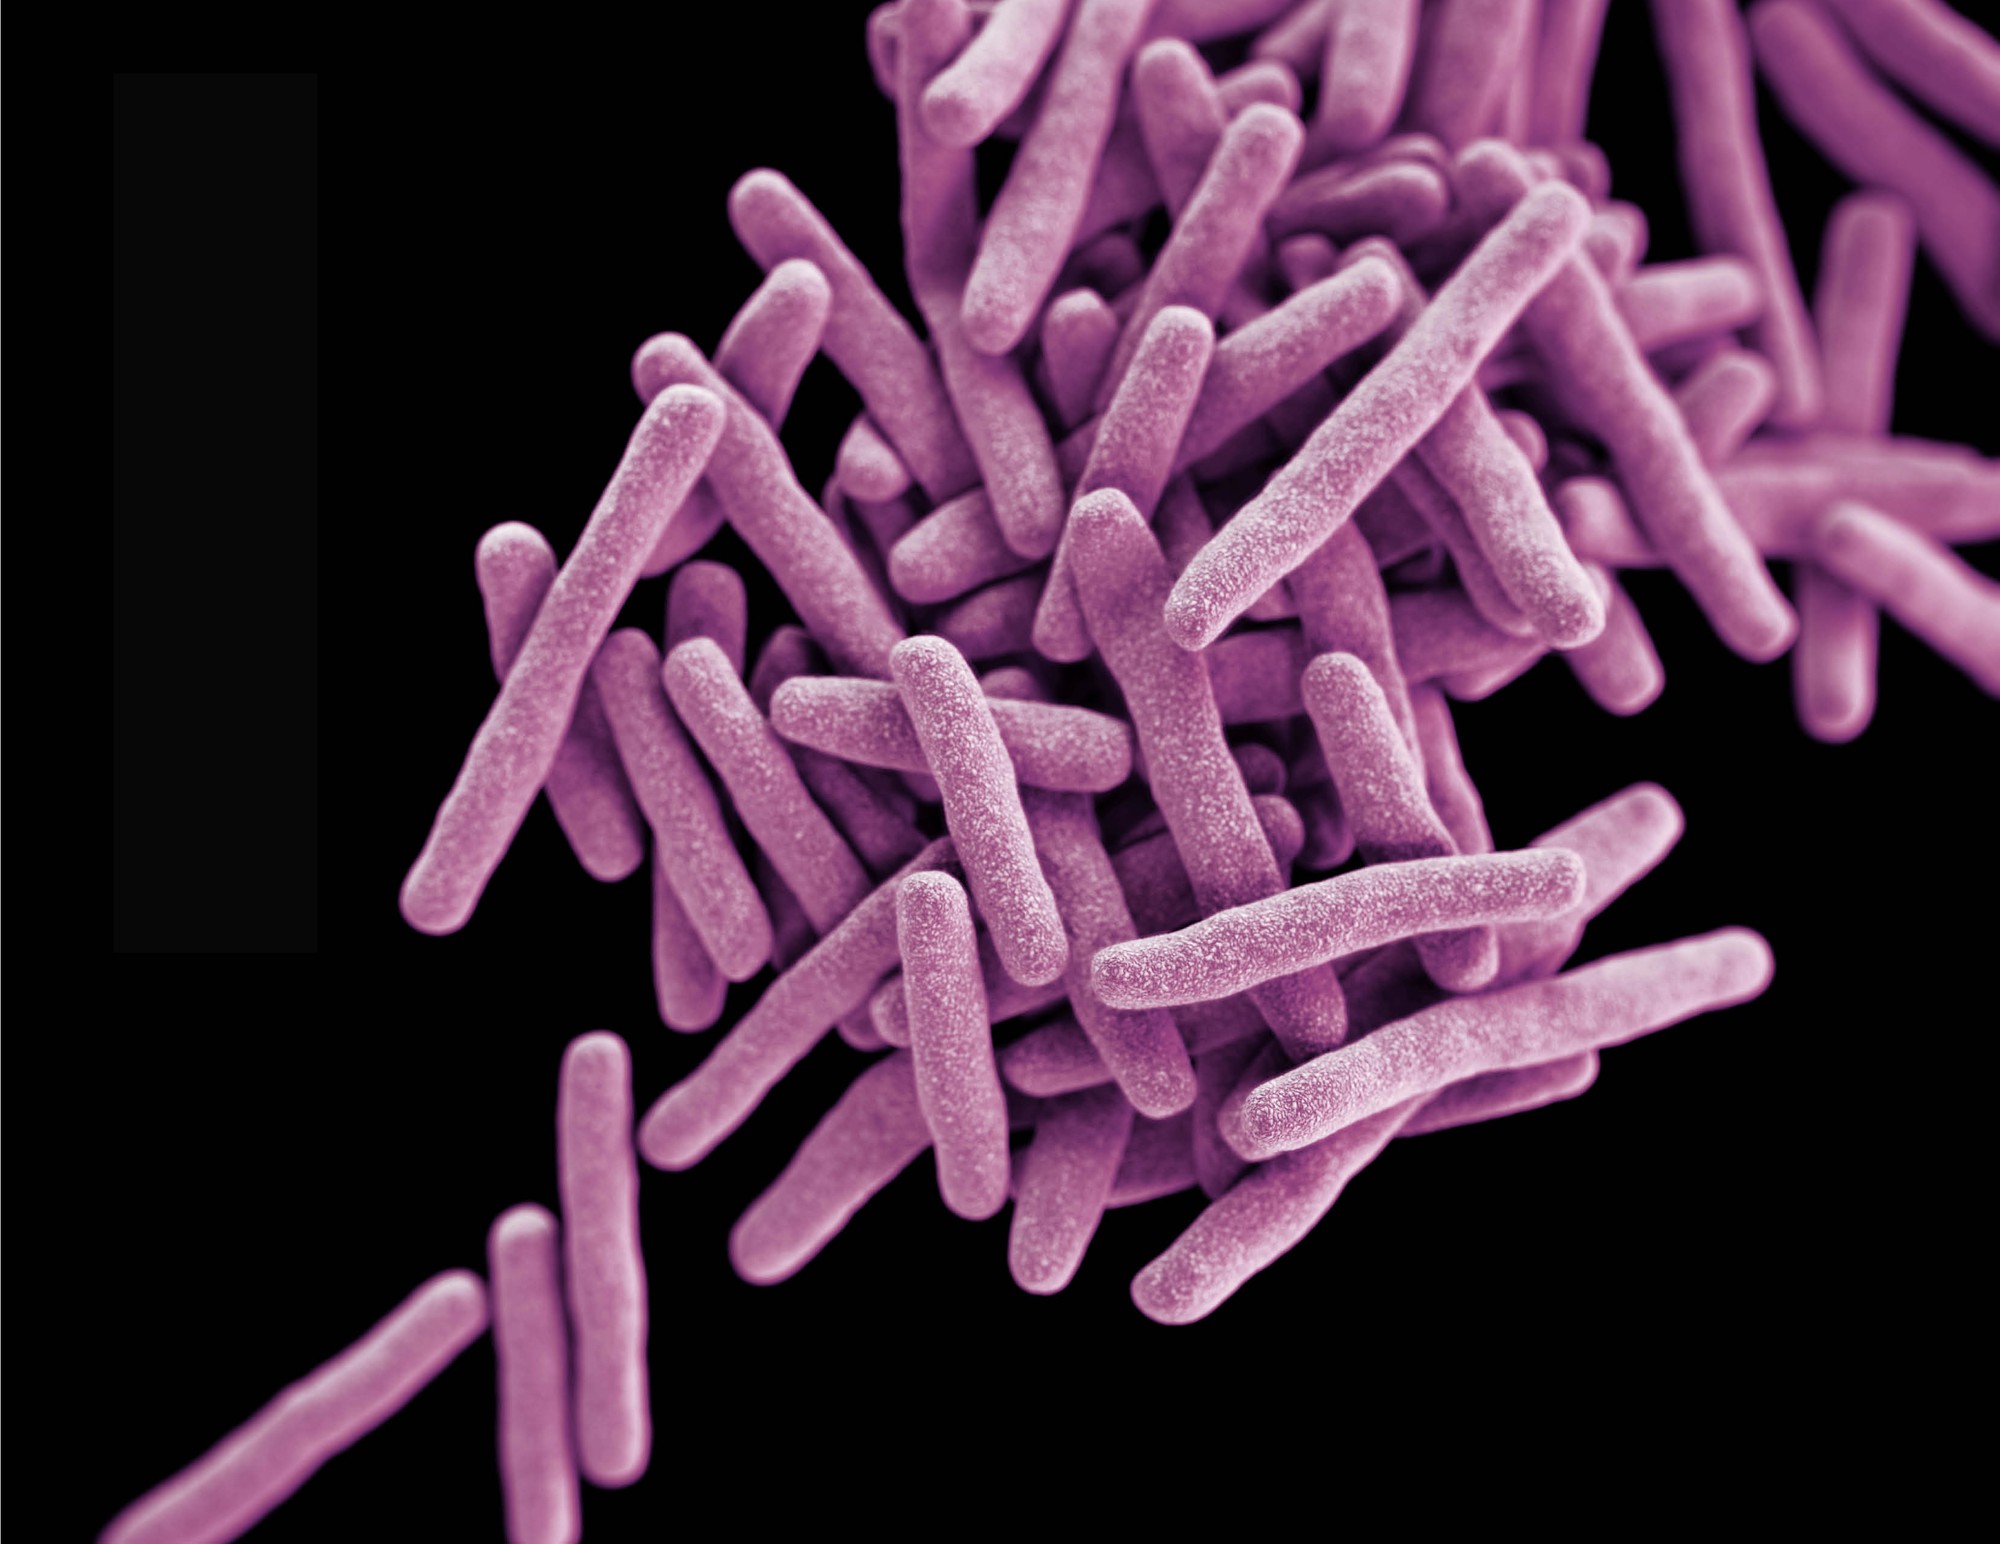 Tuberculosis bacteria thrive on a nitrogen-source buffet | eLife